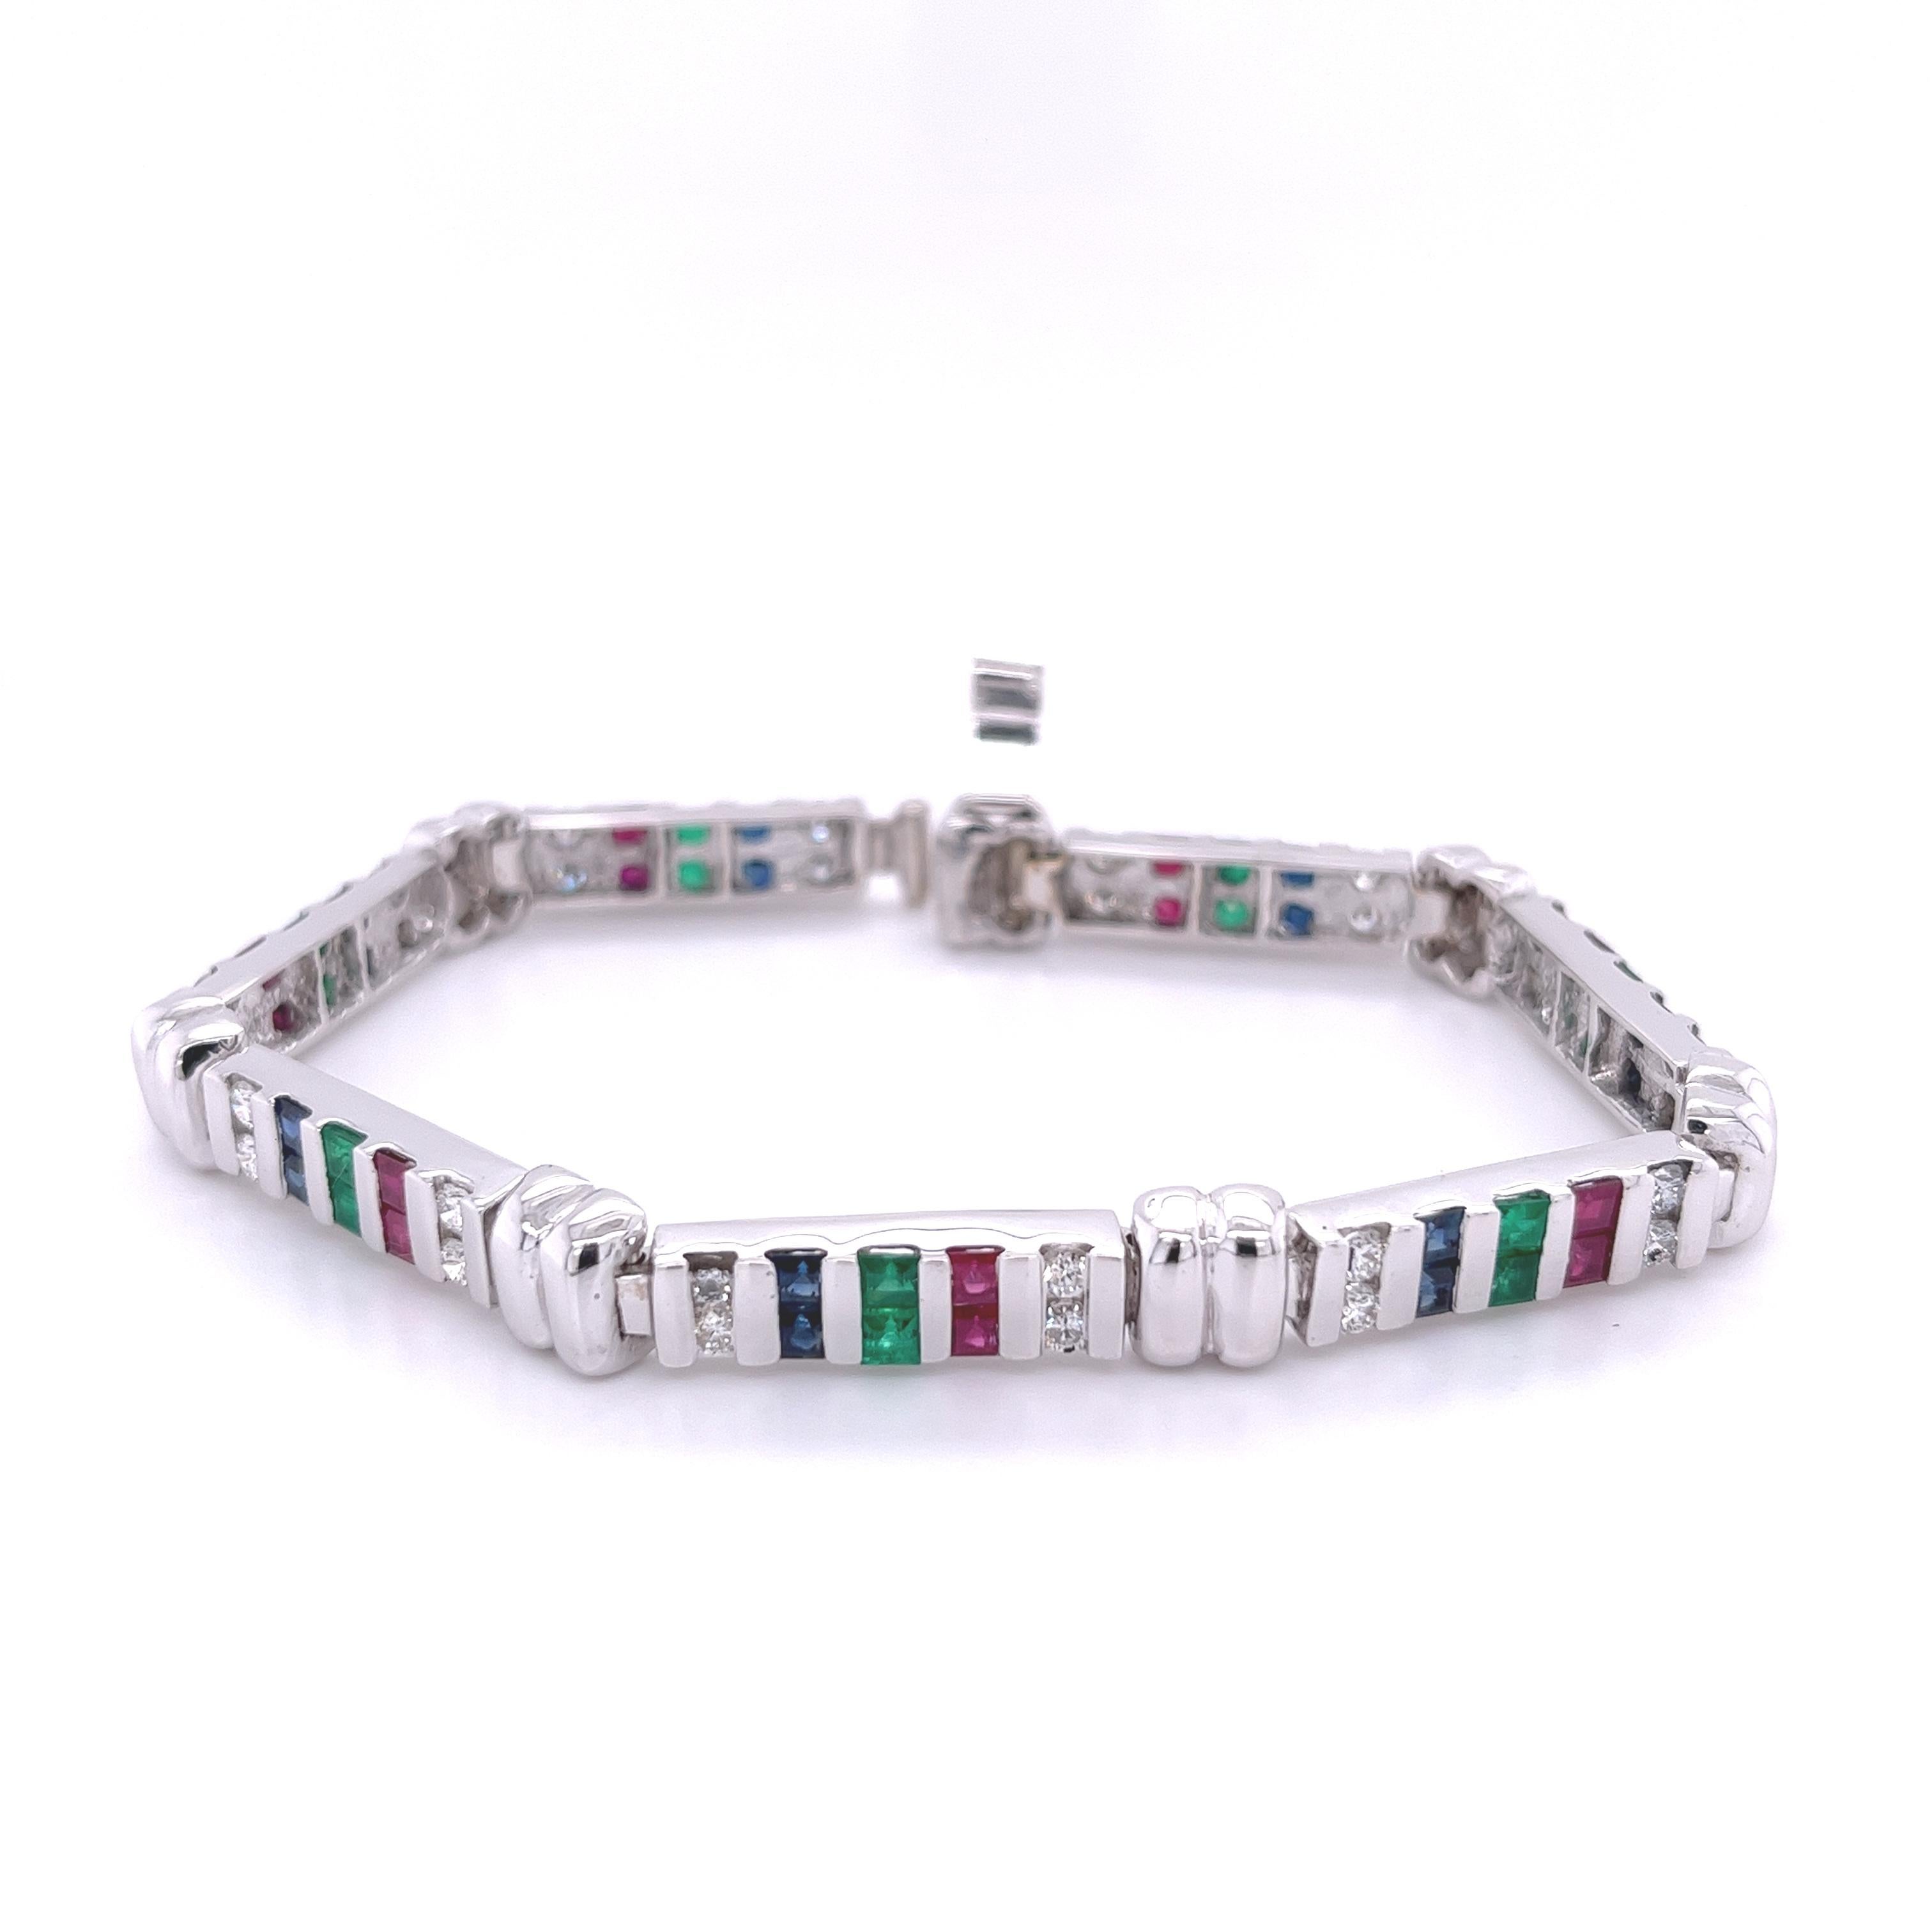 12 Carat Diamond, Ruby, Emerald and Sapphire 18K White Gold Bracelet For Sale 2